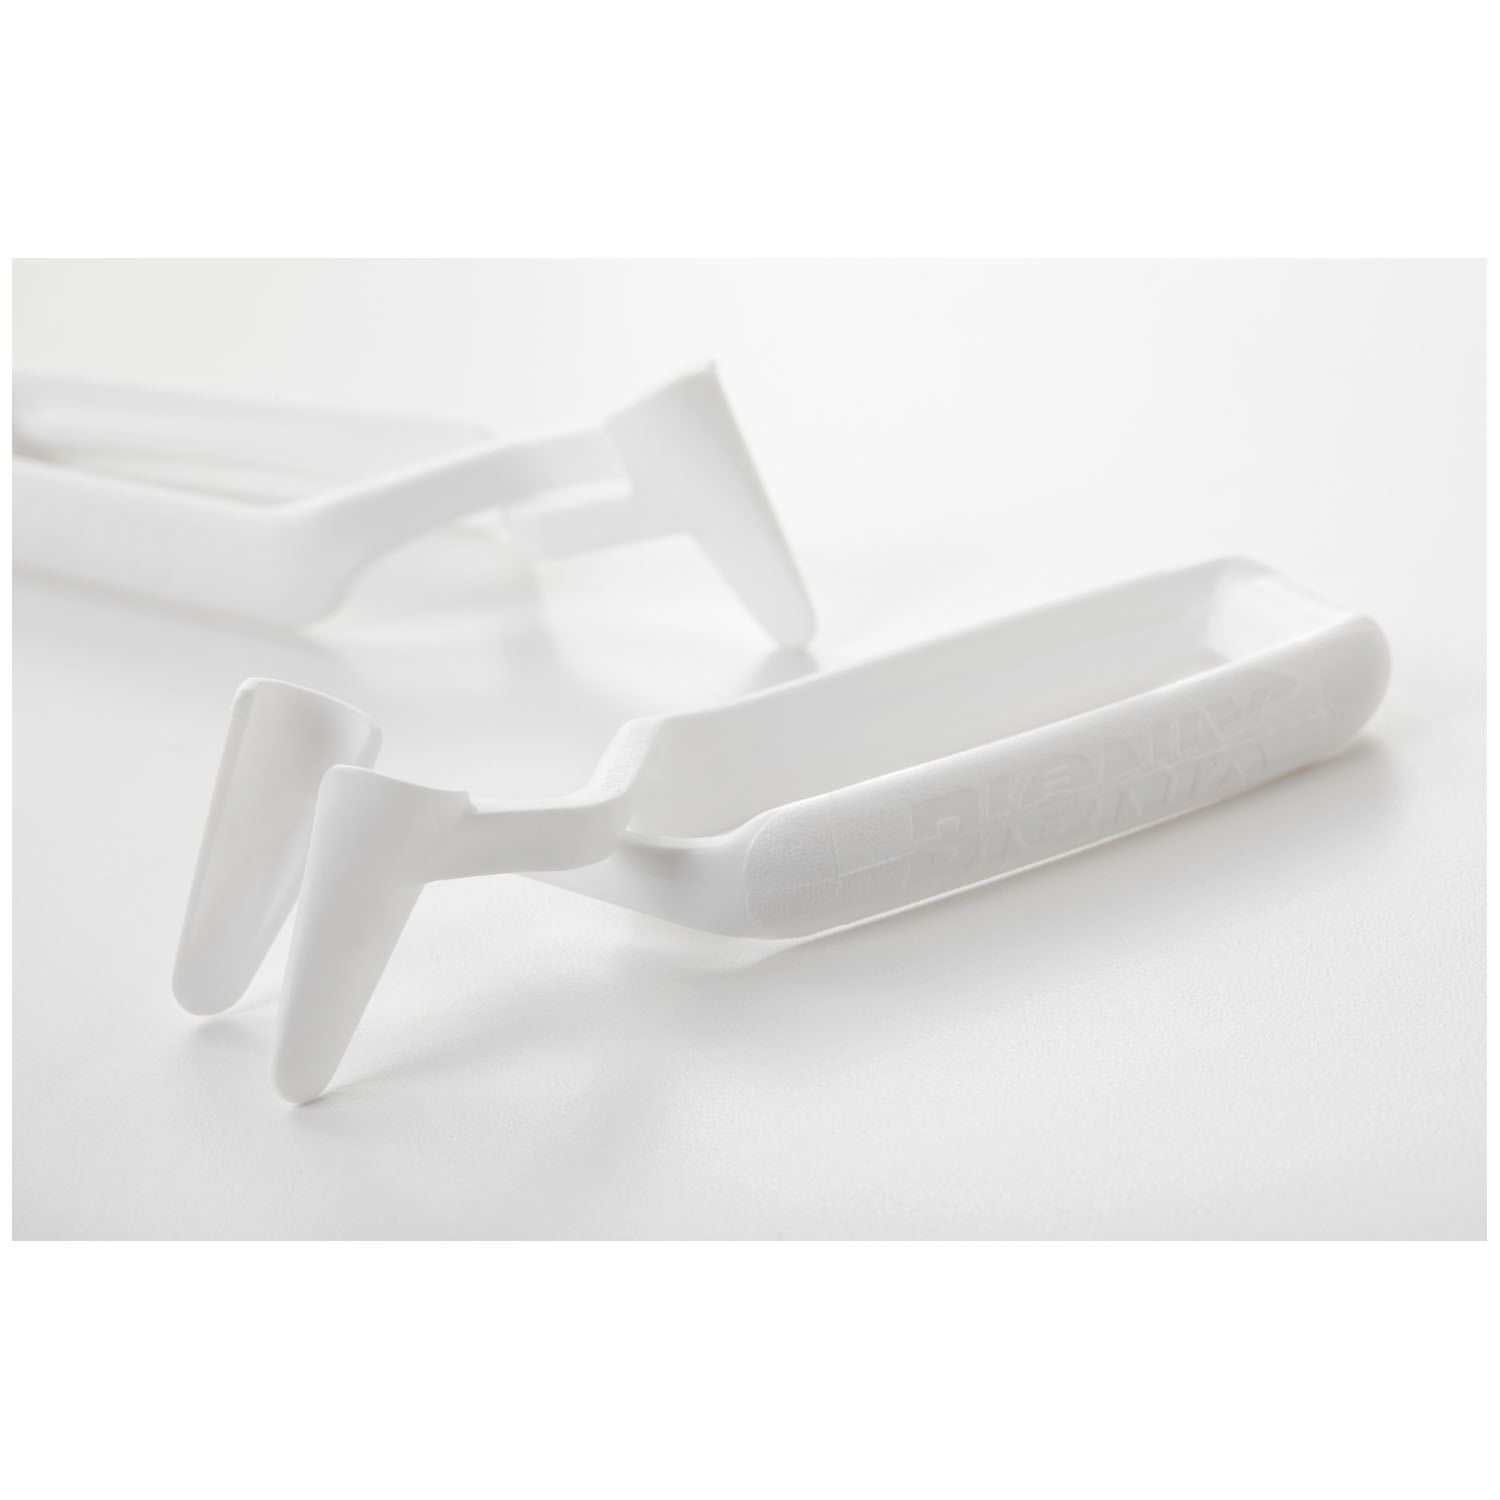 BIONIX DISPOSABLE NASAL SPECULUM : 9878 BX $30.12 Stocked